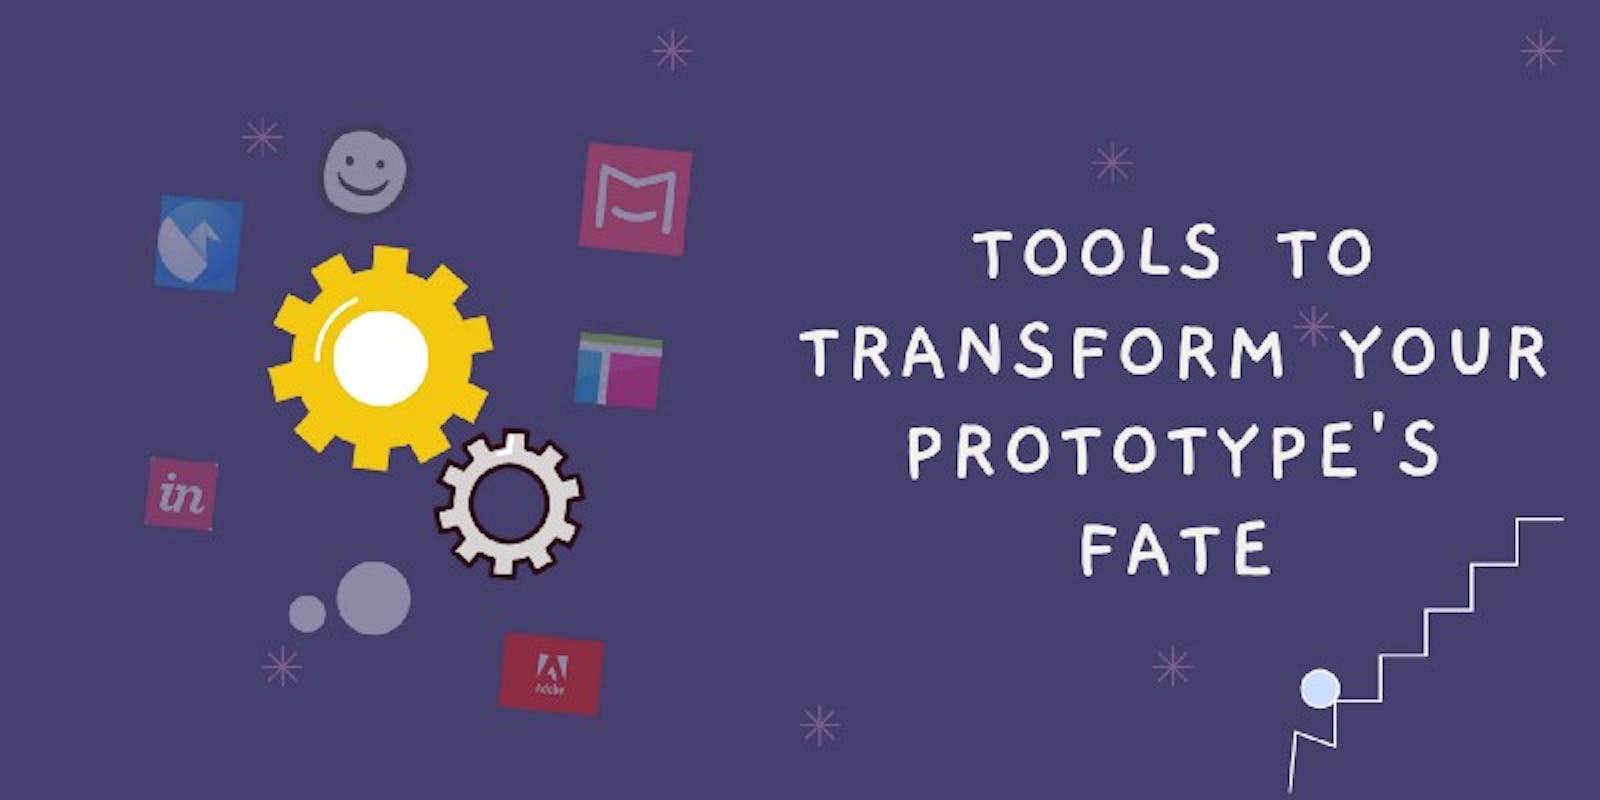 8 Tools To Transform Your Prototype’s Fate